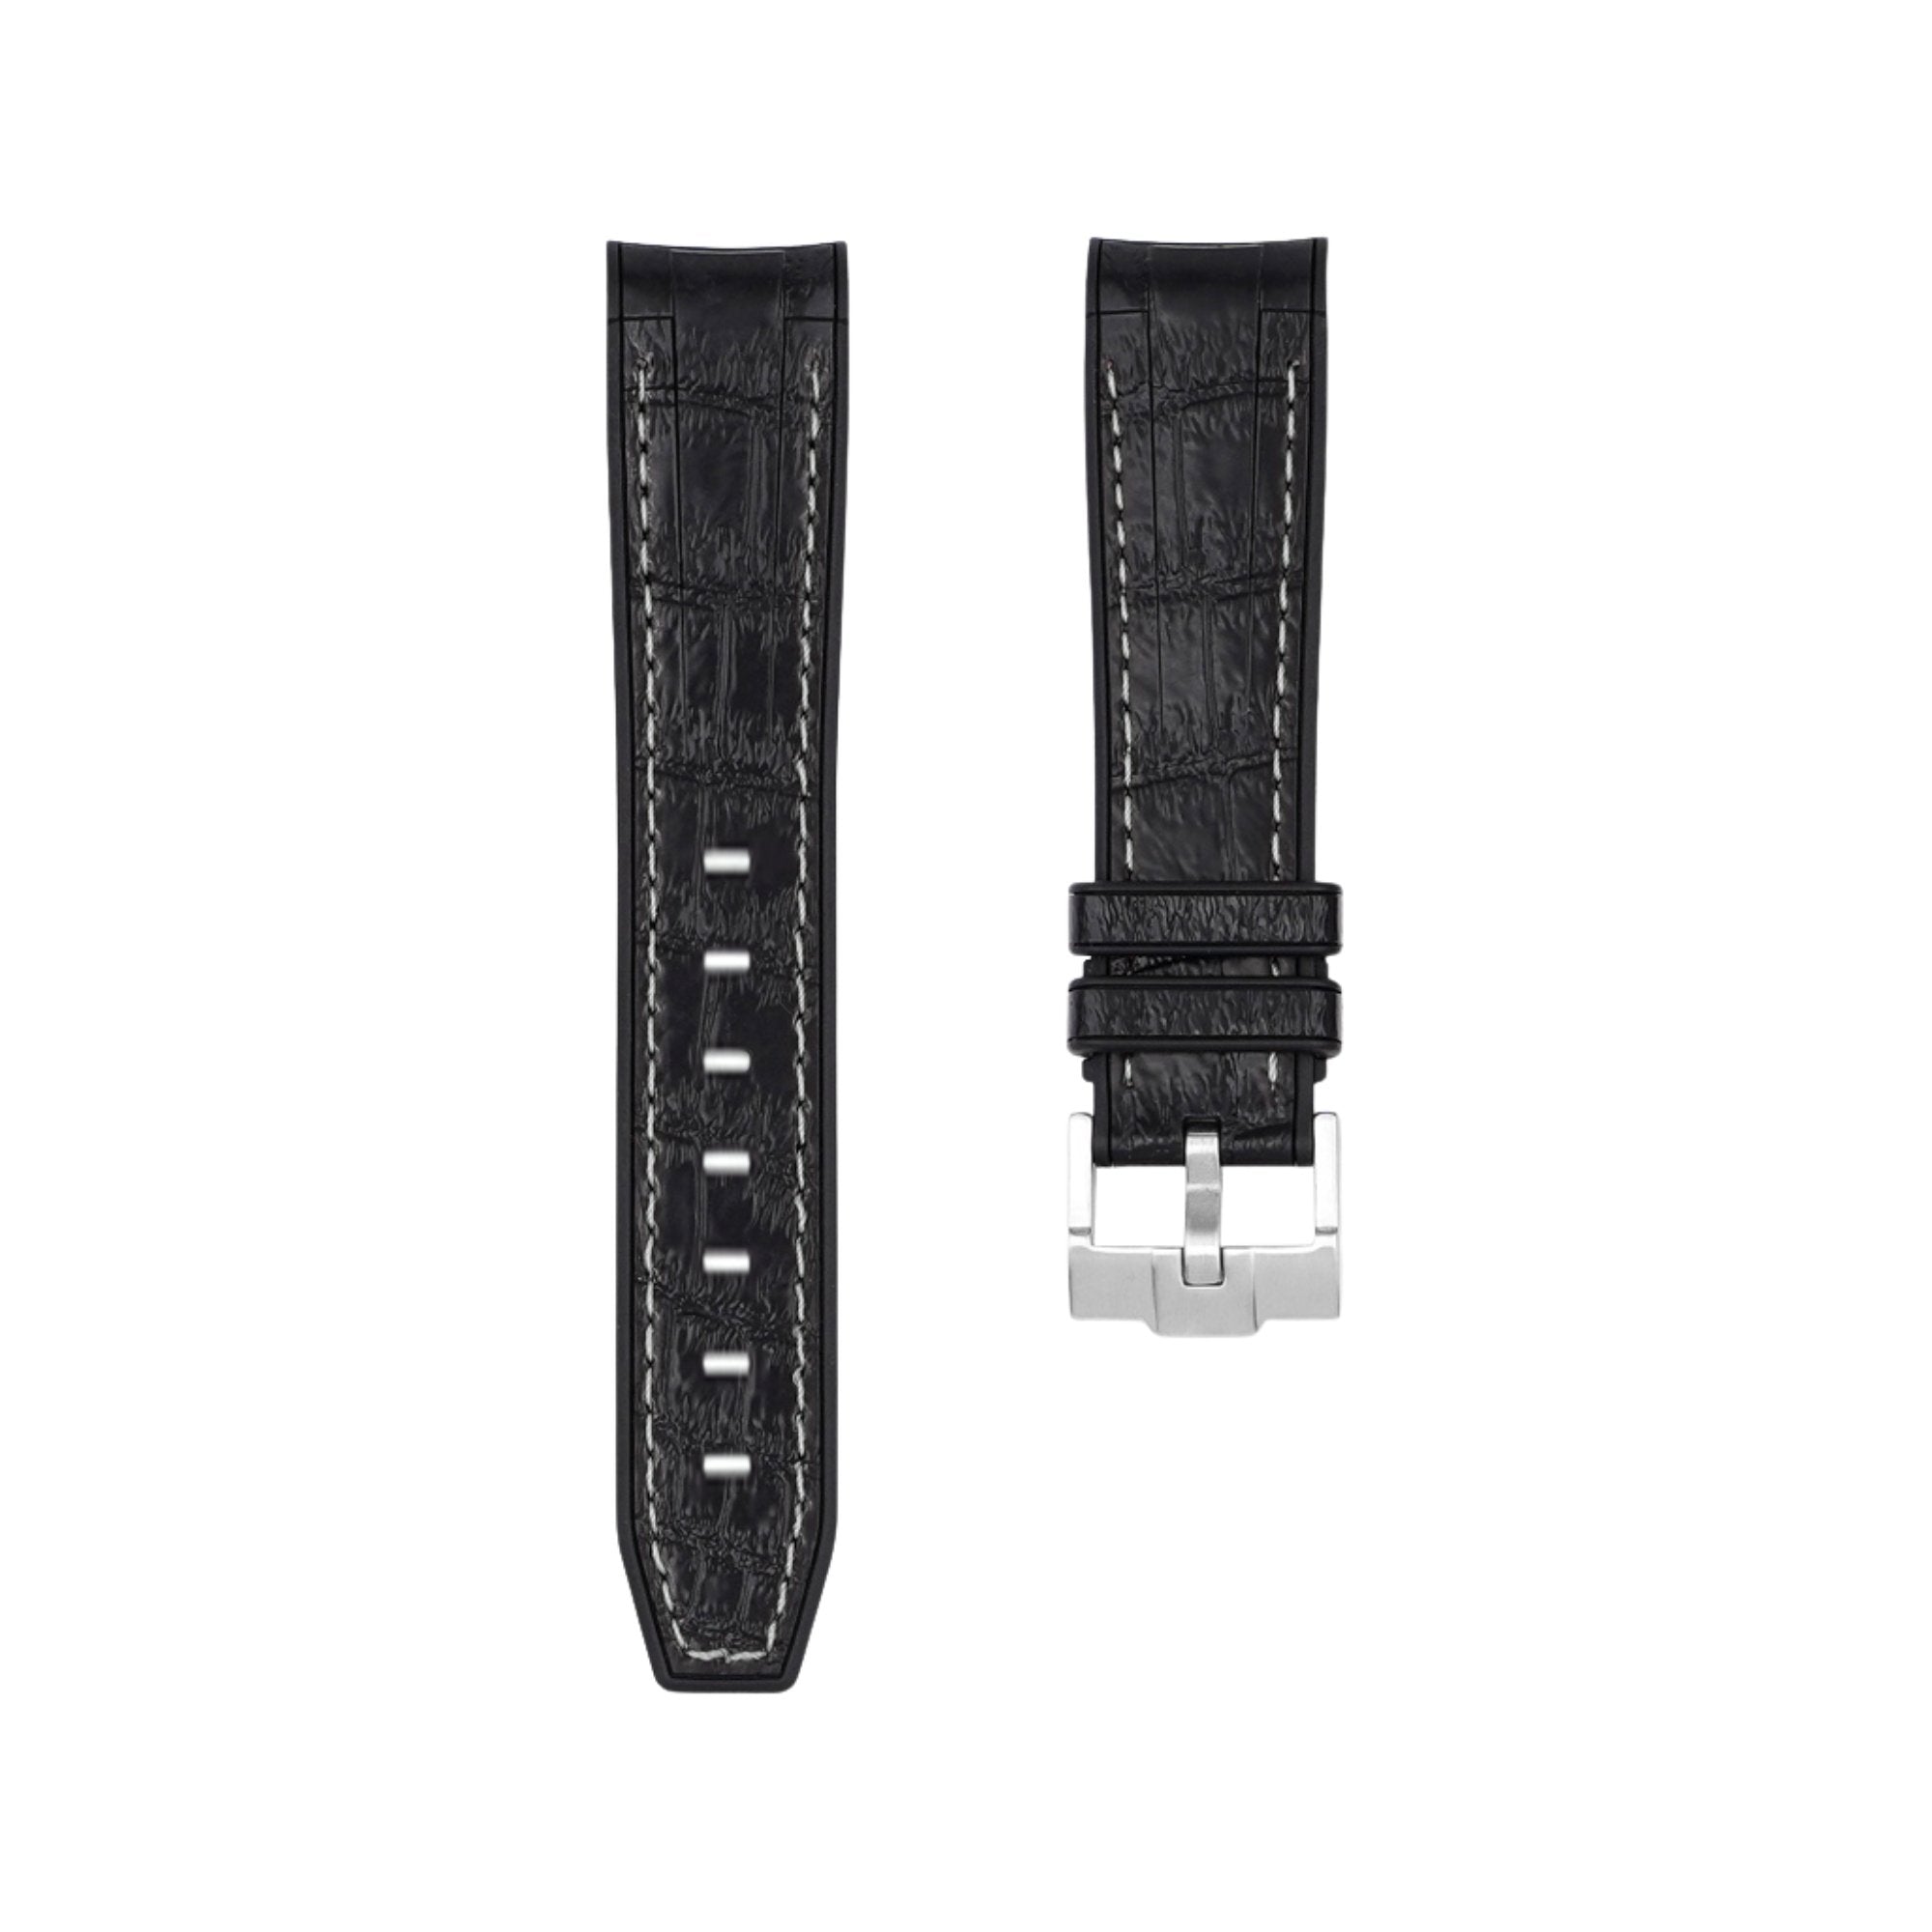 Alligator Embossed Curved End Premium Silicone Strap - Compatible with Omega Moonwatch - Black with White Stitch (2406) -StrapSeeker